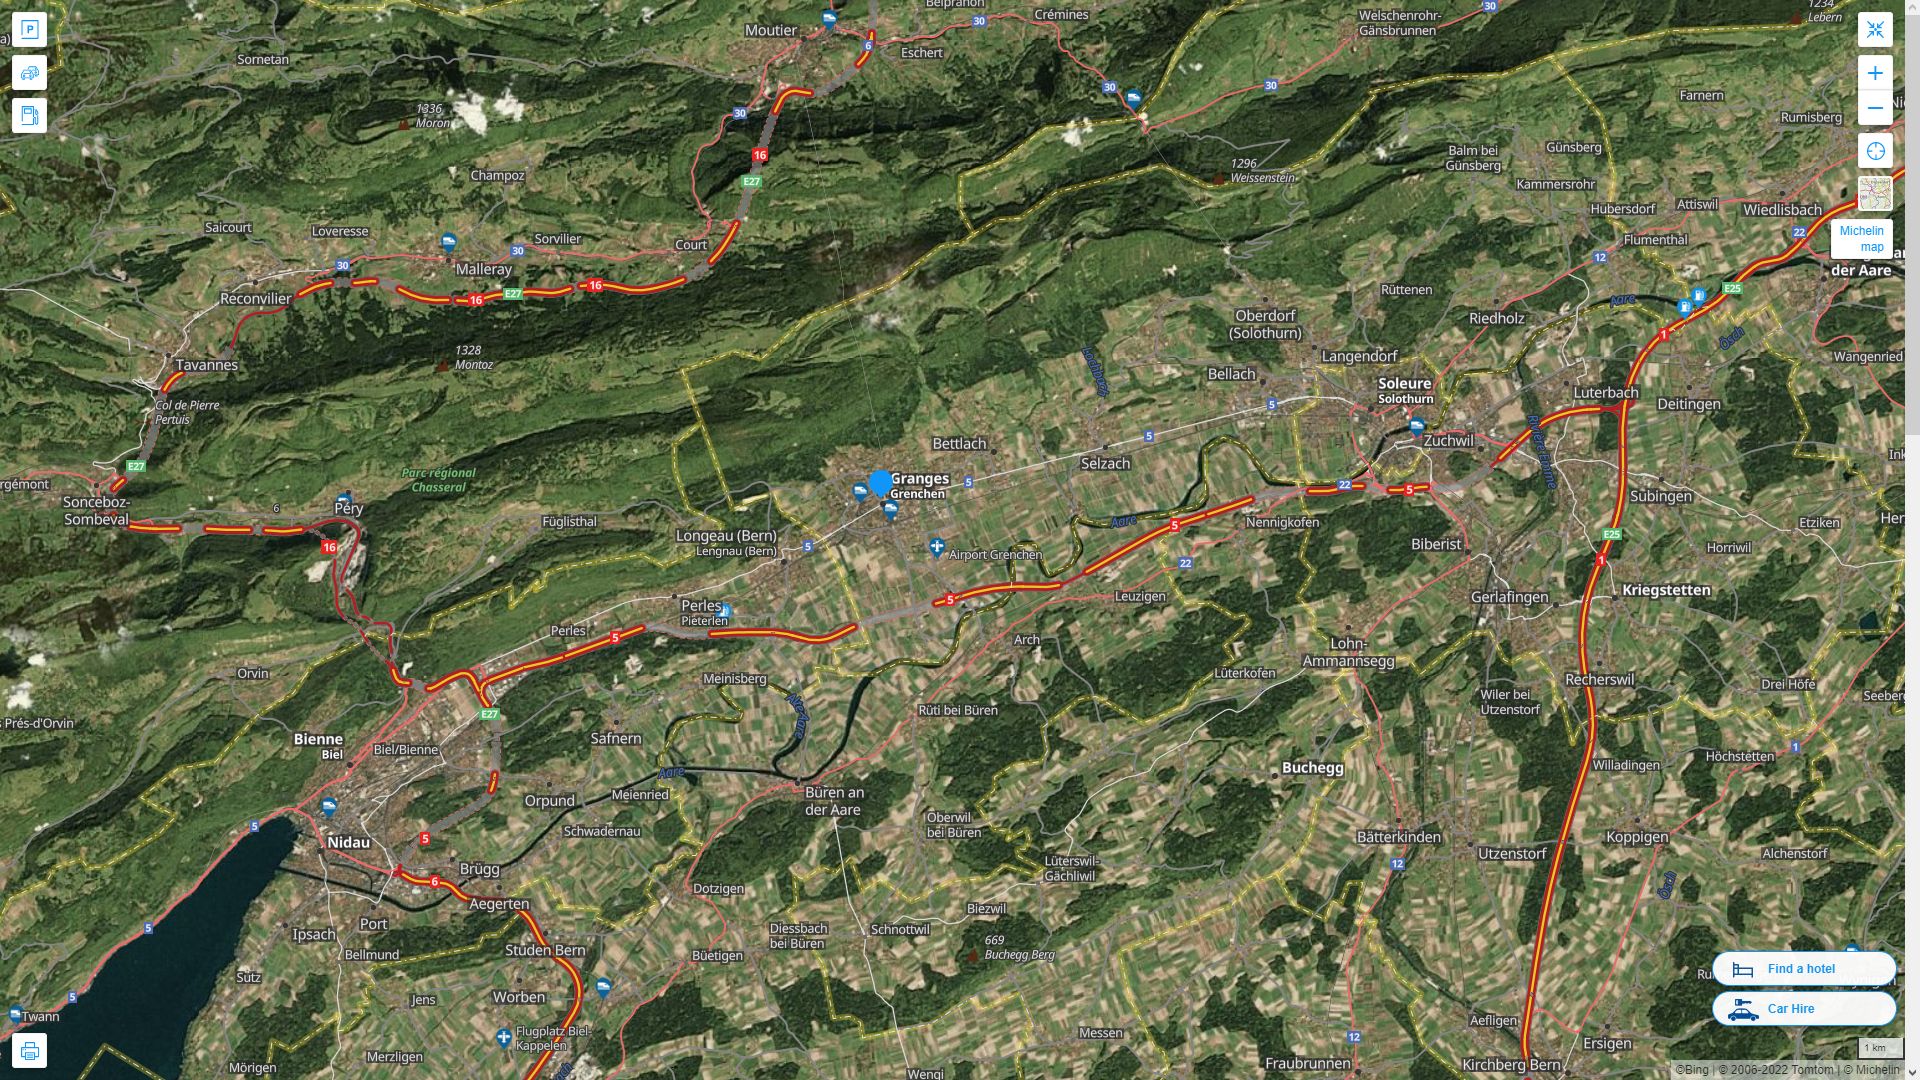 Grenchen Highway and Road Map with Satellite View